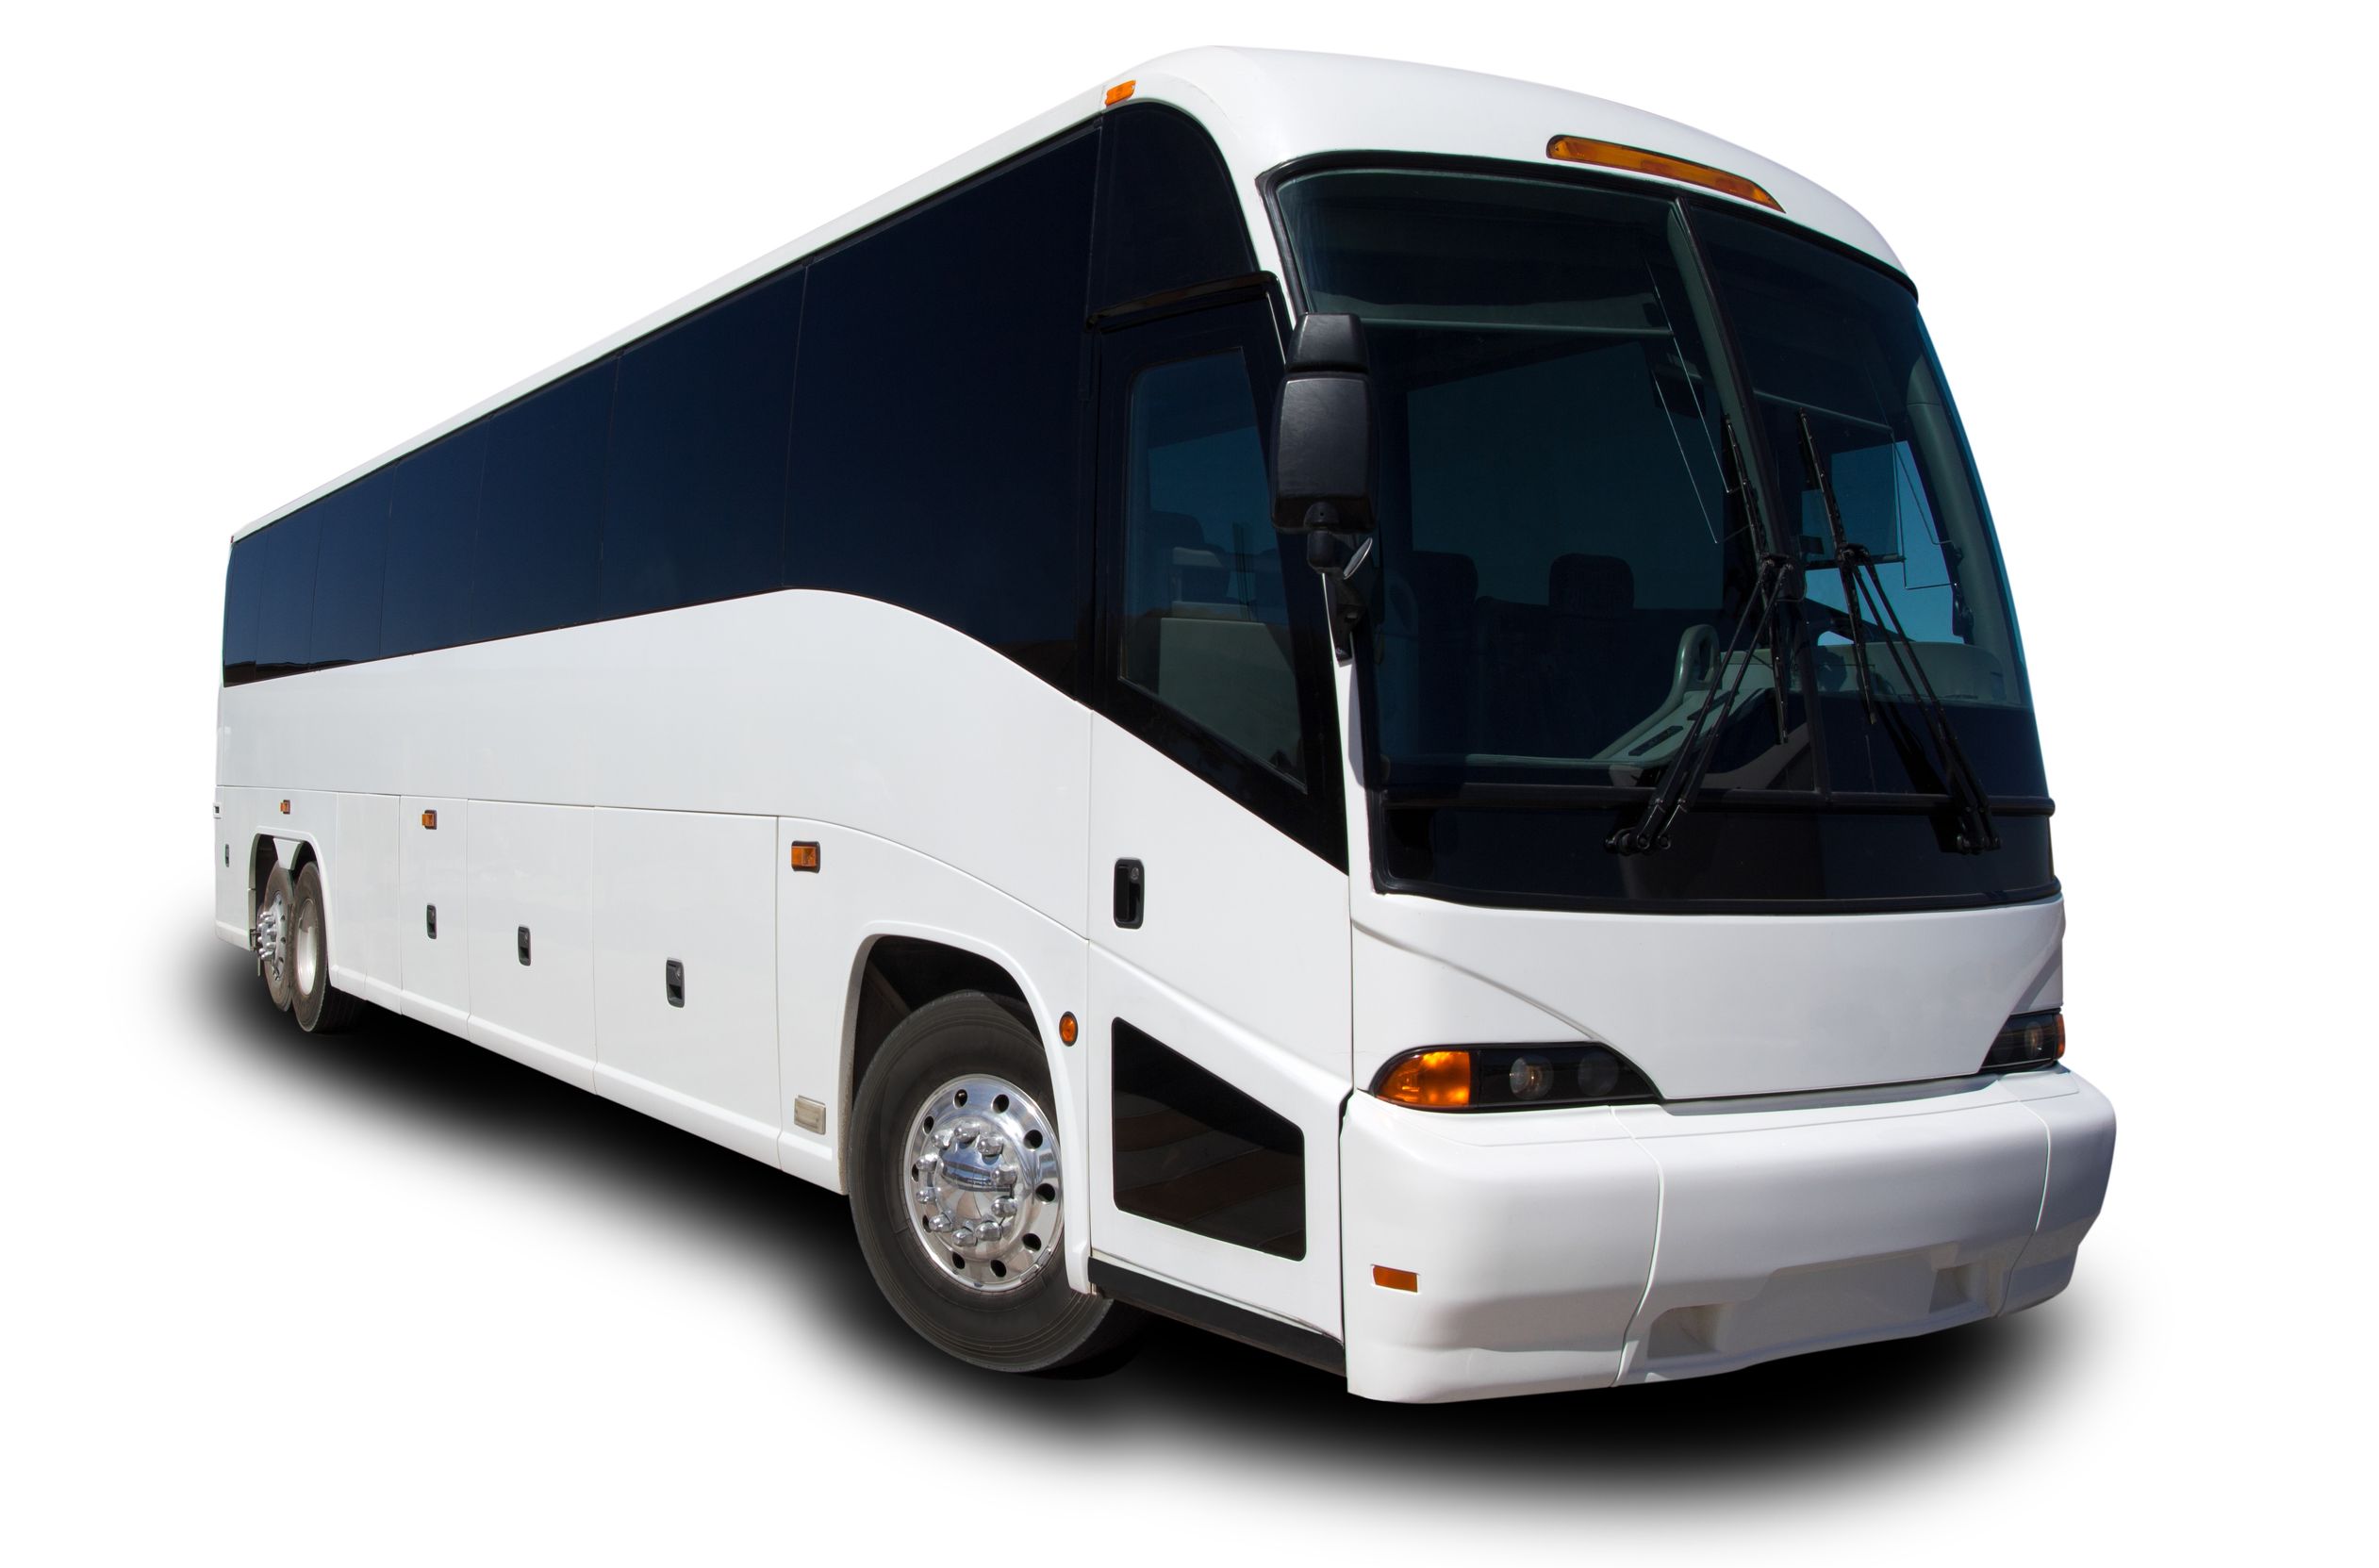 Charter a Bus in York PA For Your Next Vacation